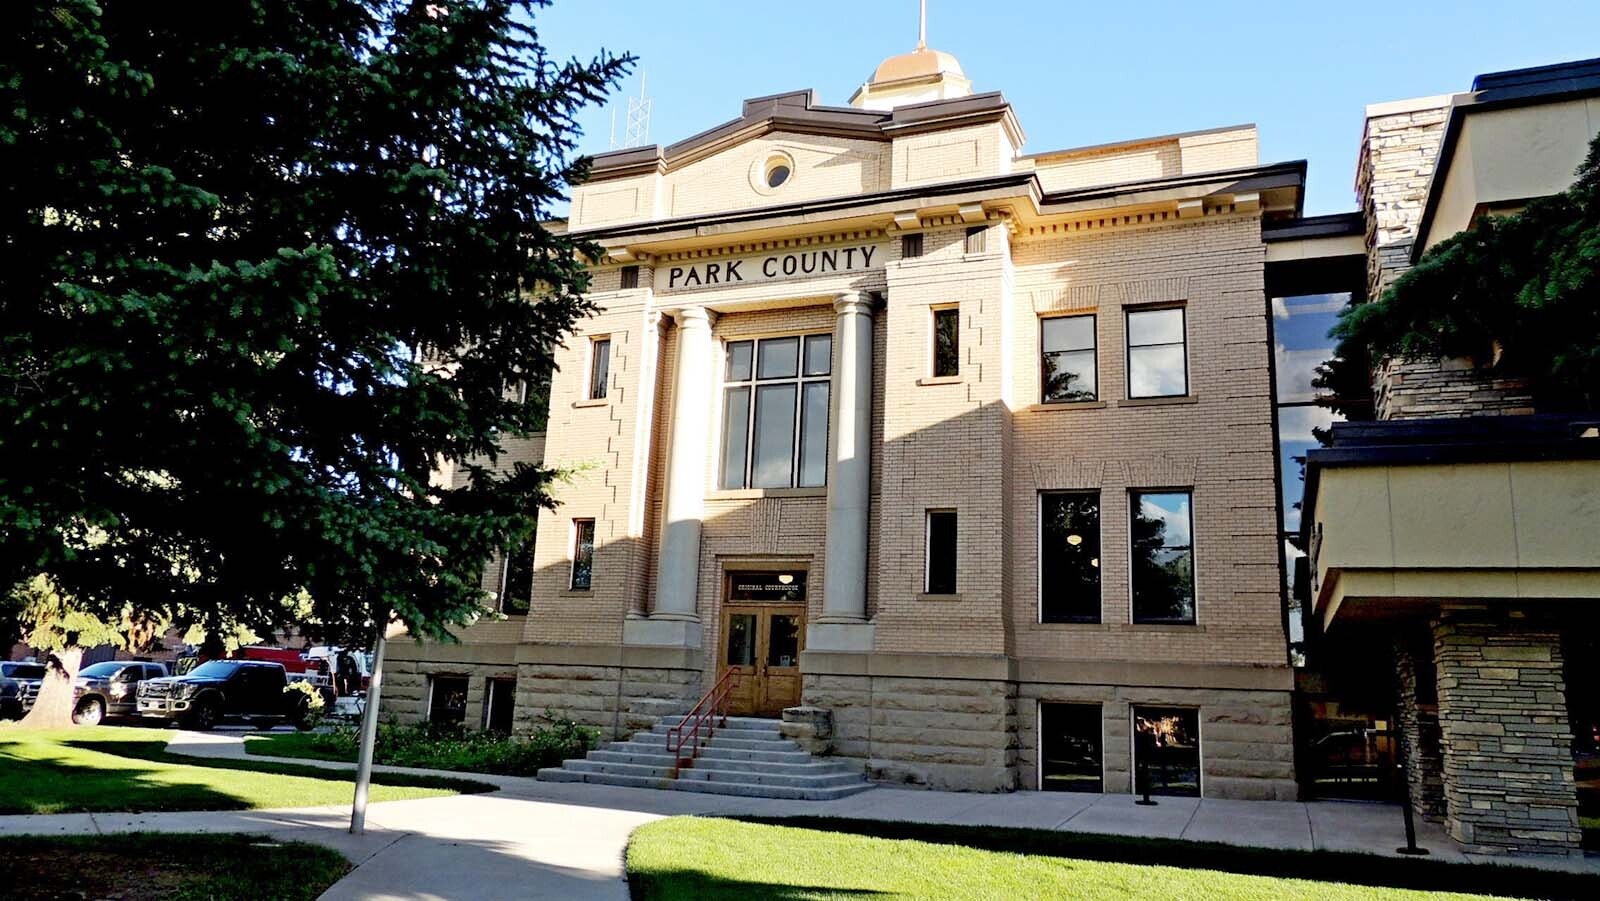 Park County courthouse 9 12 23